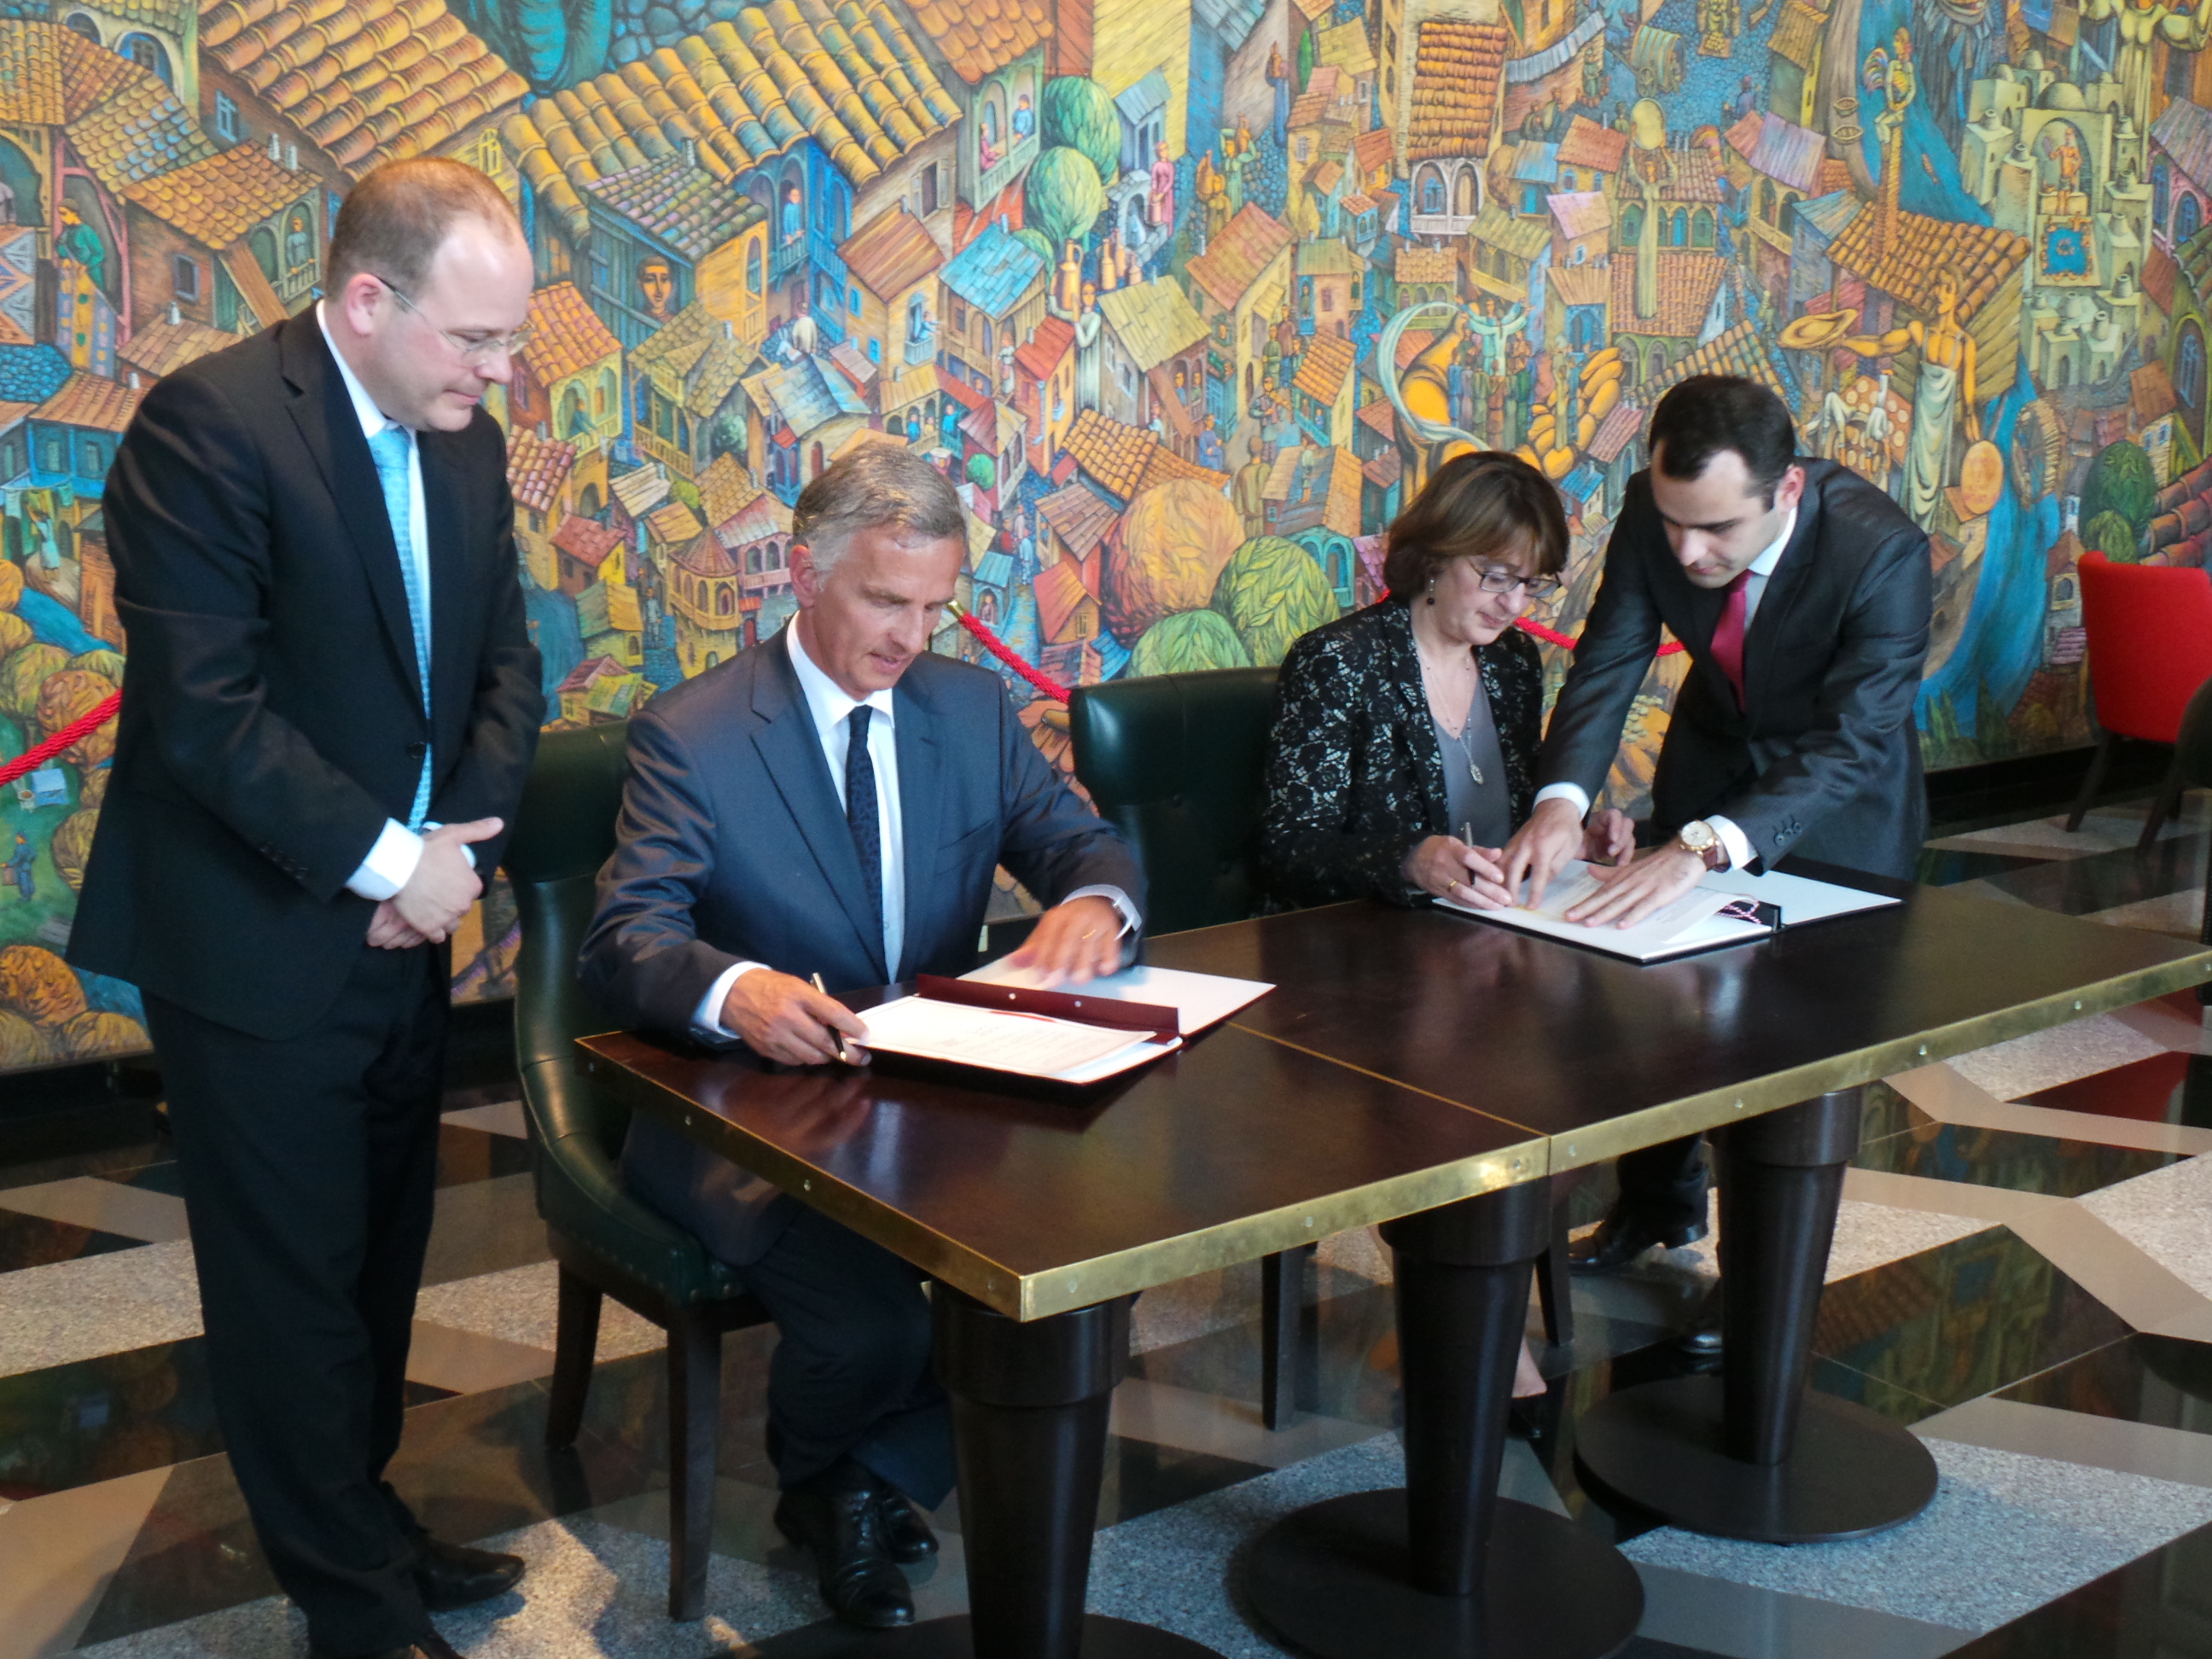 The President of the Swiss Confederation, Didier Burkhalter, and Georgian Foreign Minister Maia Panjikidze signing a Memorandum of Understanding on collaboration between the foreign ministries of Switzerland and Georgia.